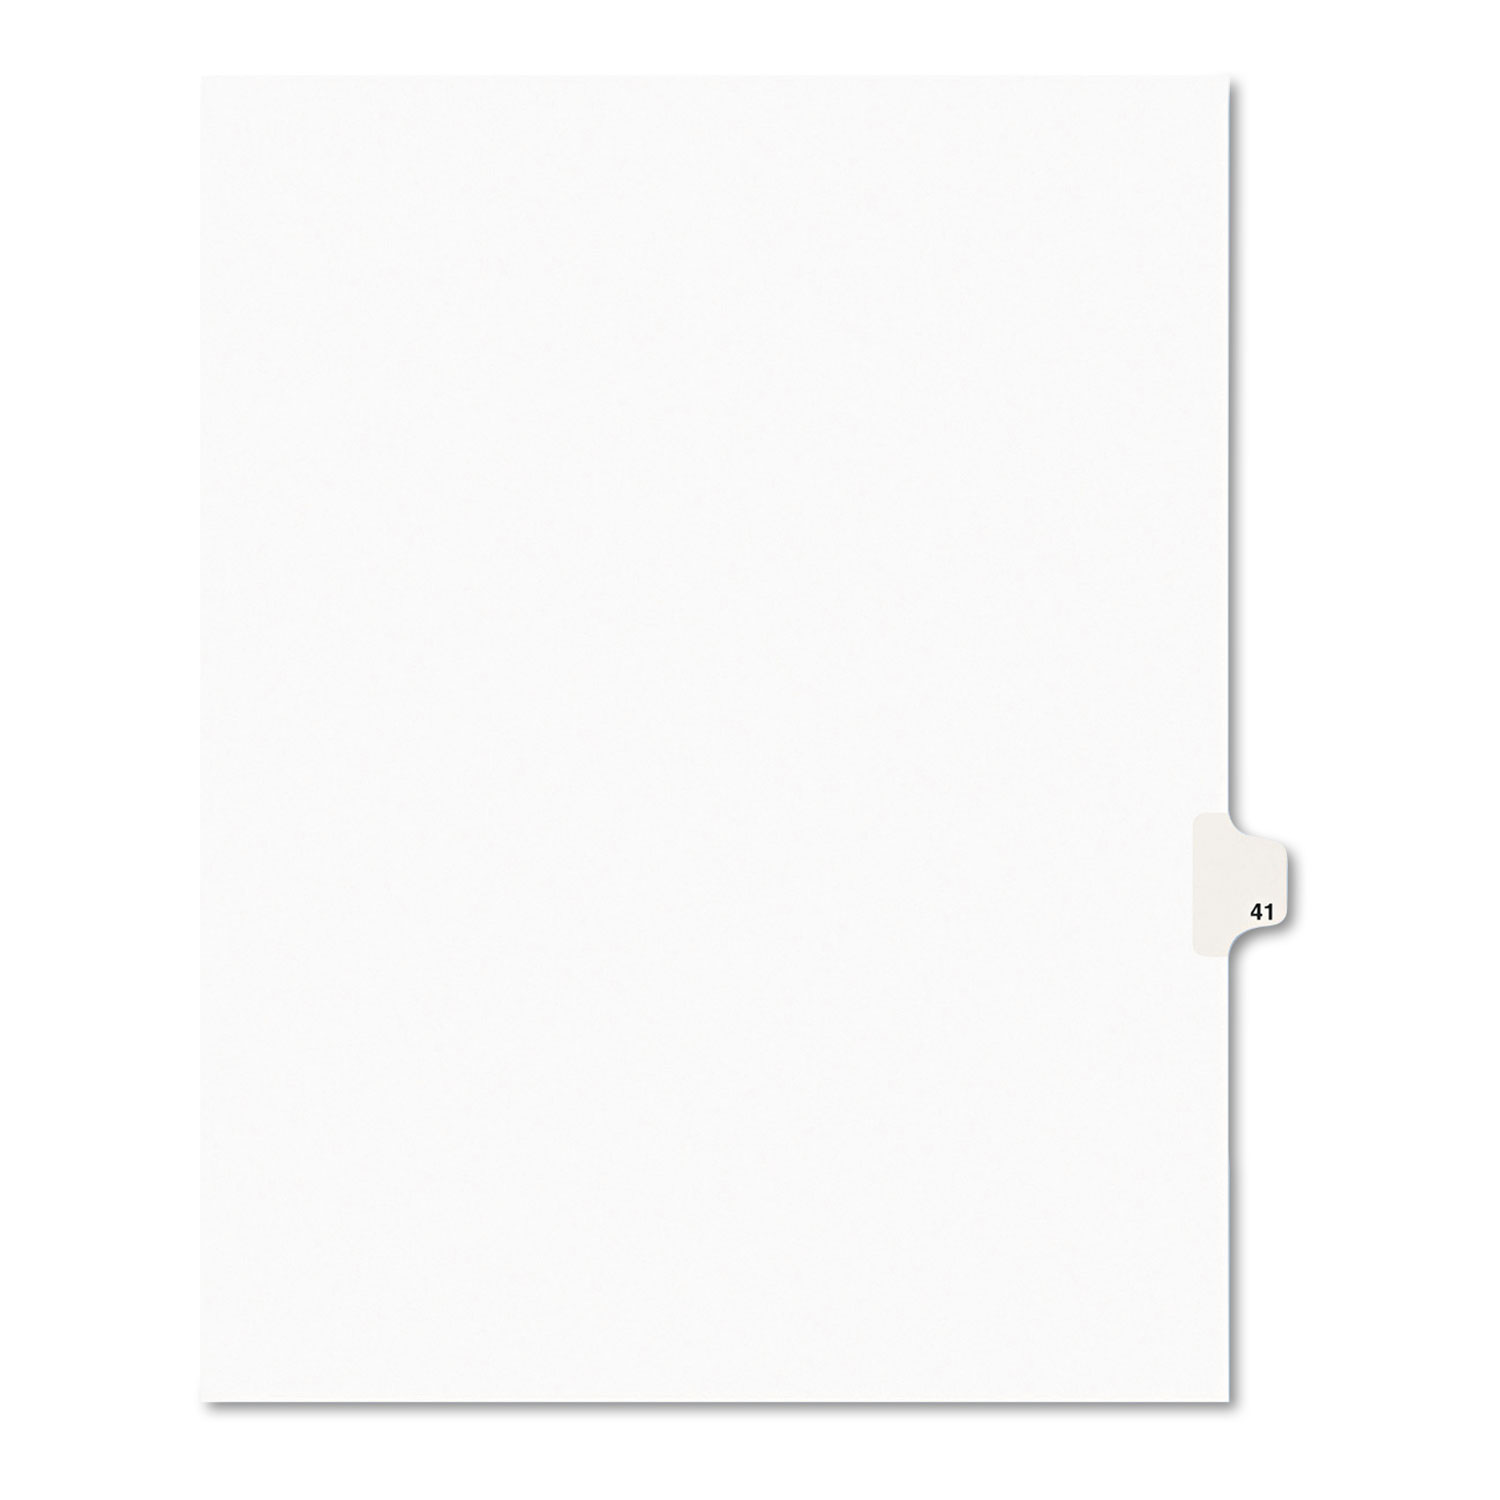  Avery 01041 Preprinted Legal Exhibit Side Tab Index Dividers, Avery Style, 10-Tab, 41, 11 x 8.5, White, 25/Pack (AVE01041) 